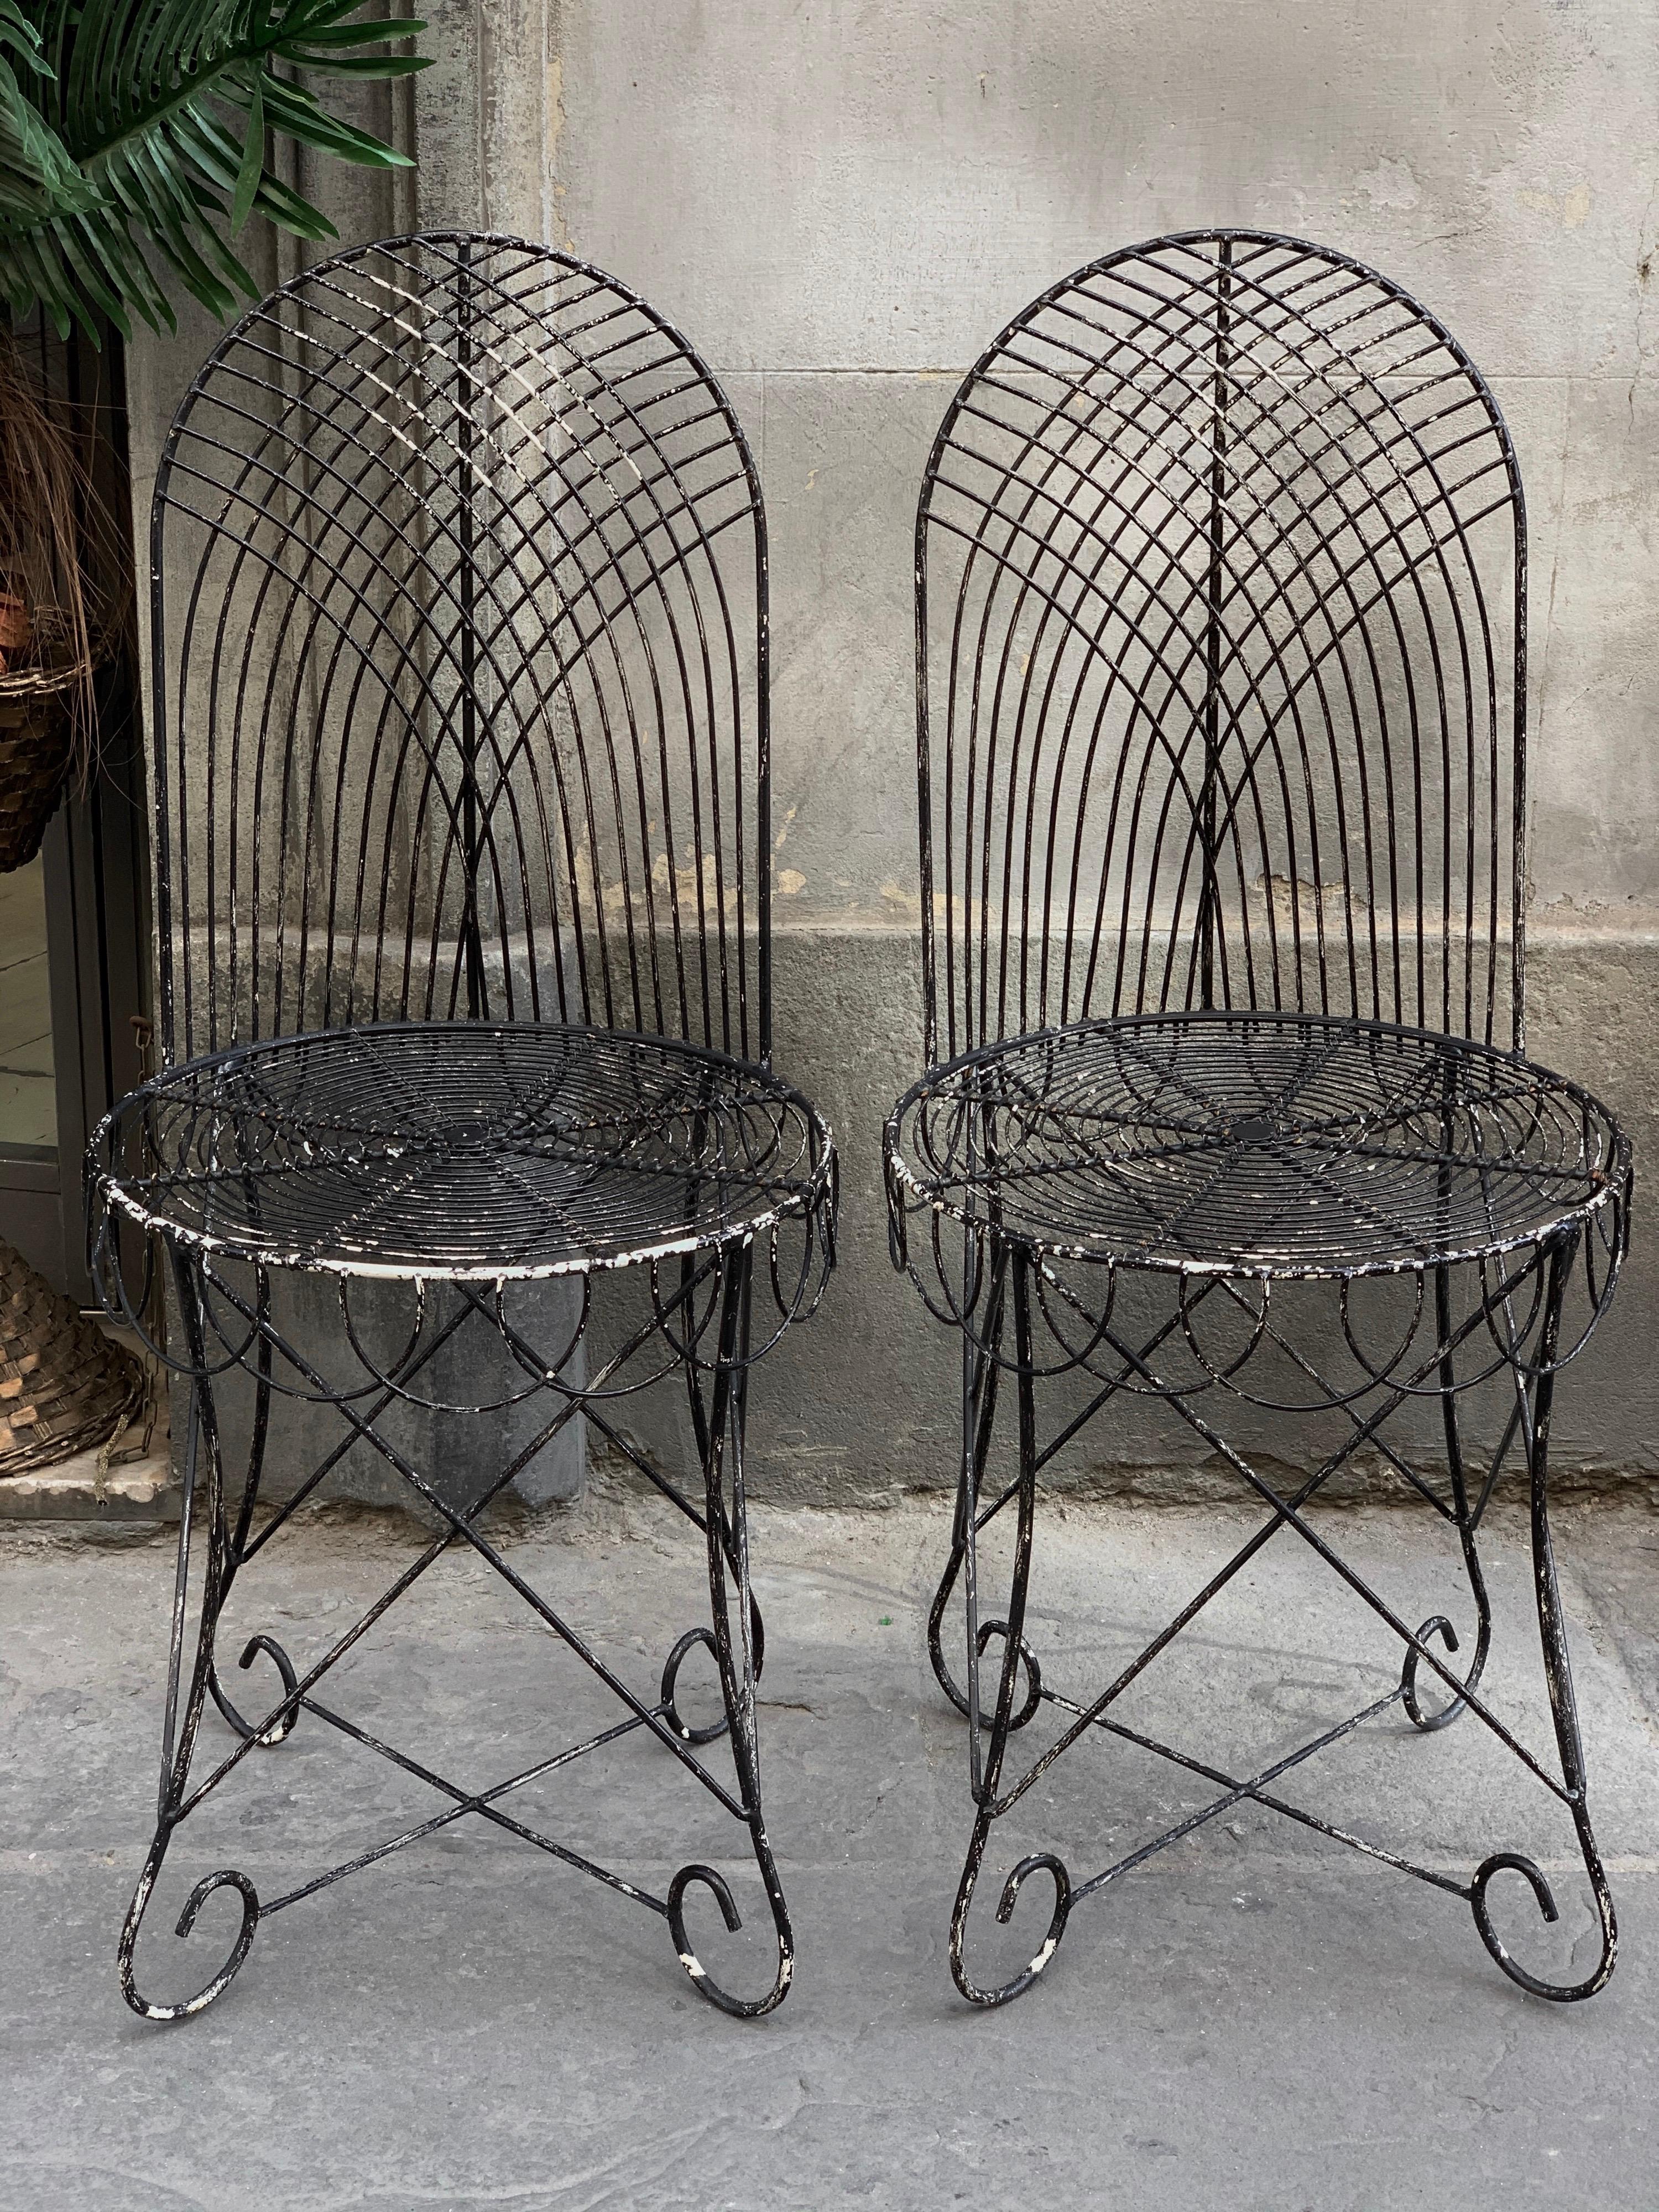 Vintage black wrought iron midcentury garden pair of chairs. The chairs are made of handmade Wrought Iron, the structure has a perfect vintage condition, heavy and stable.
They are painted black, many paint wear that gives the vintage